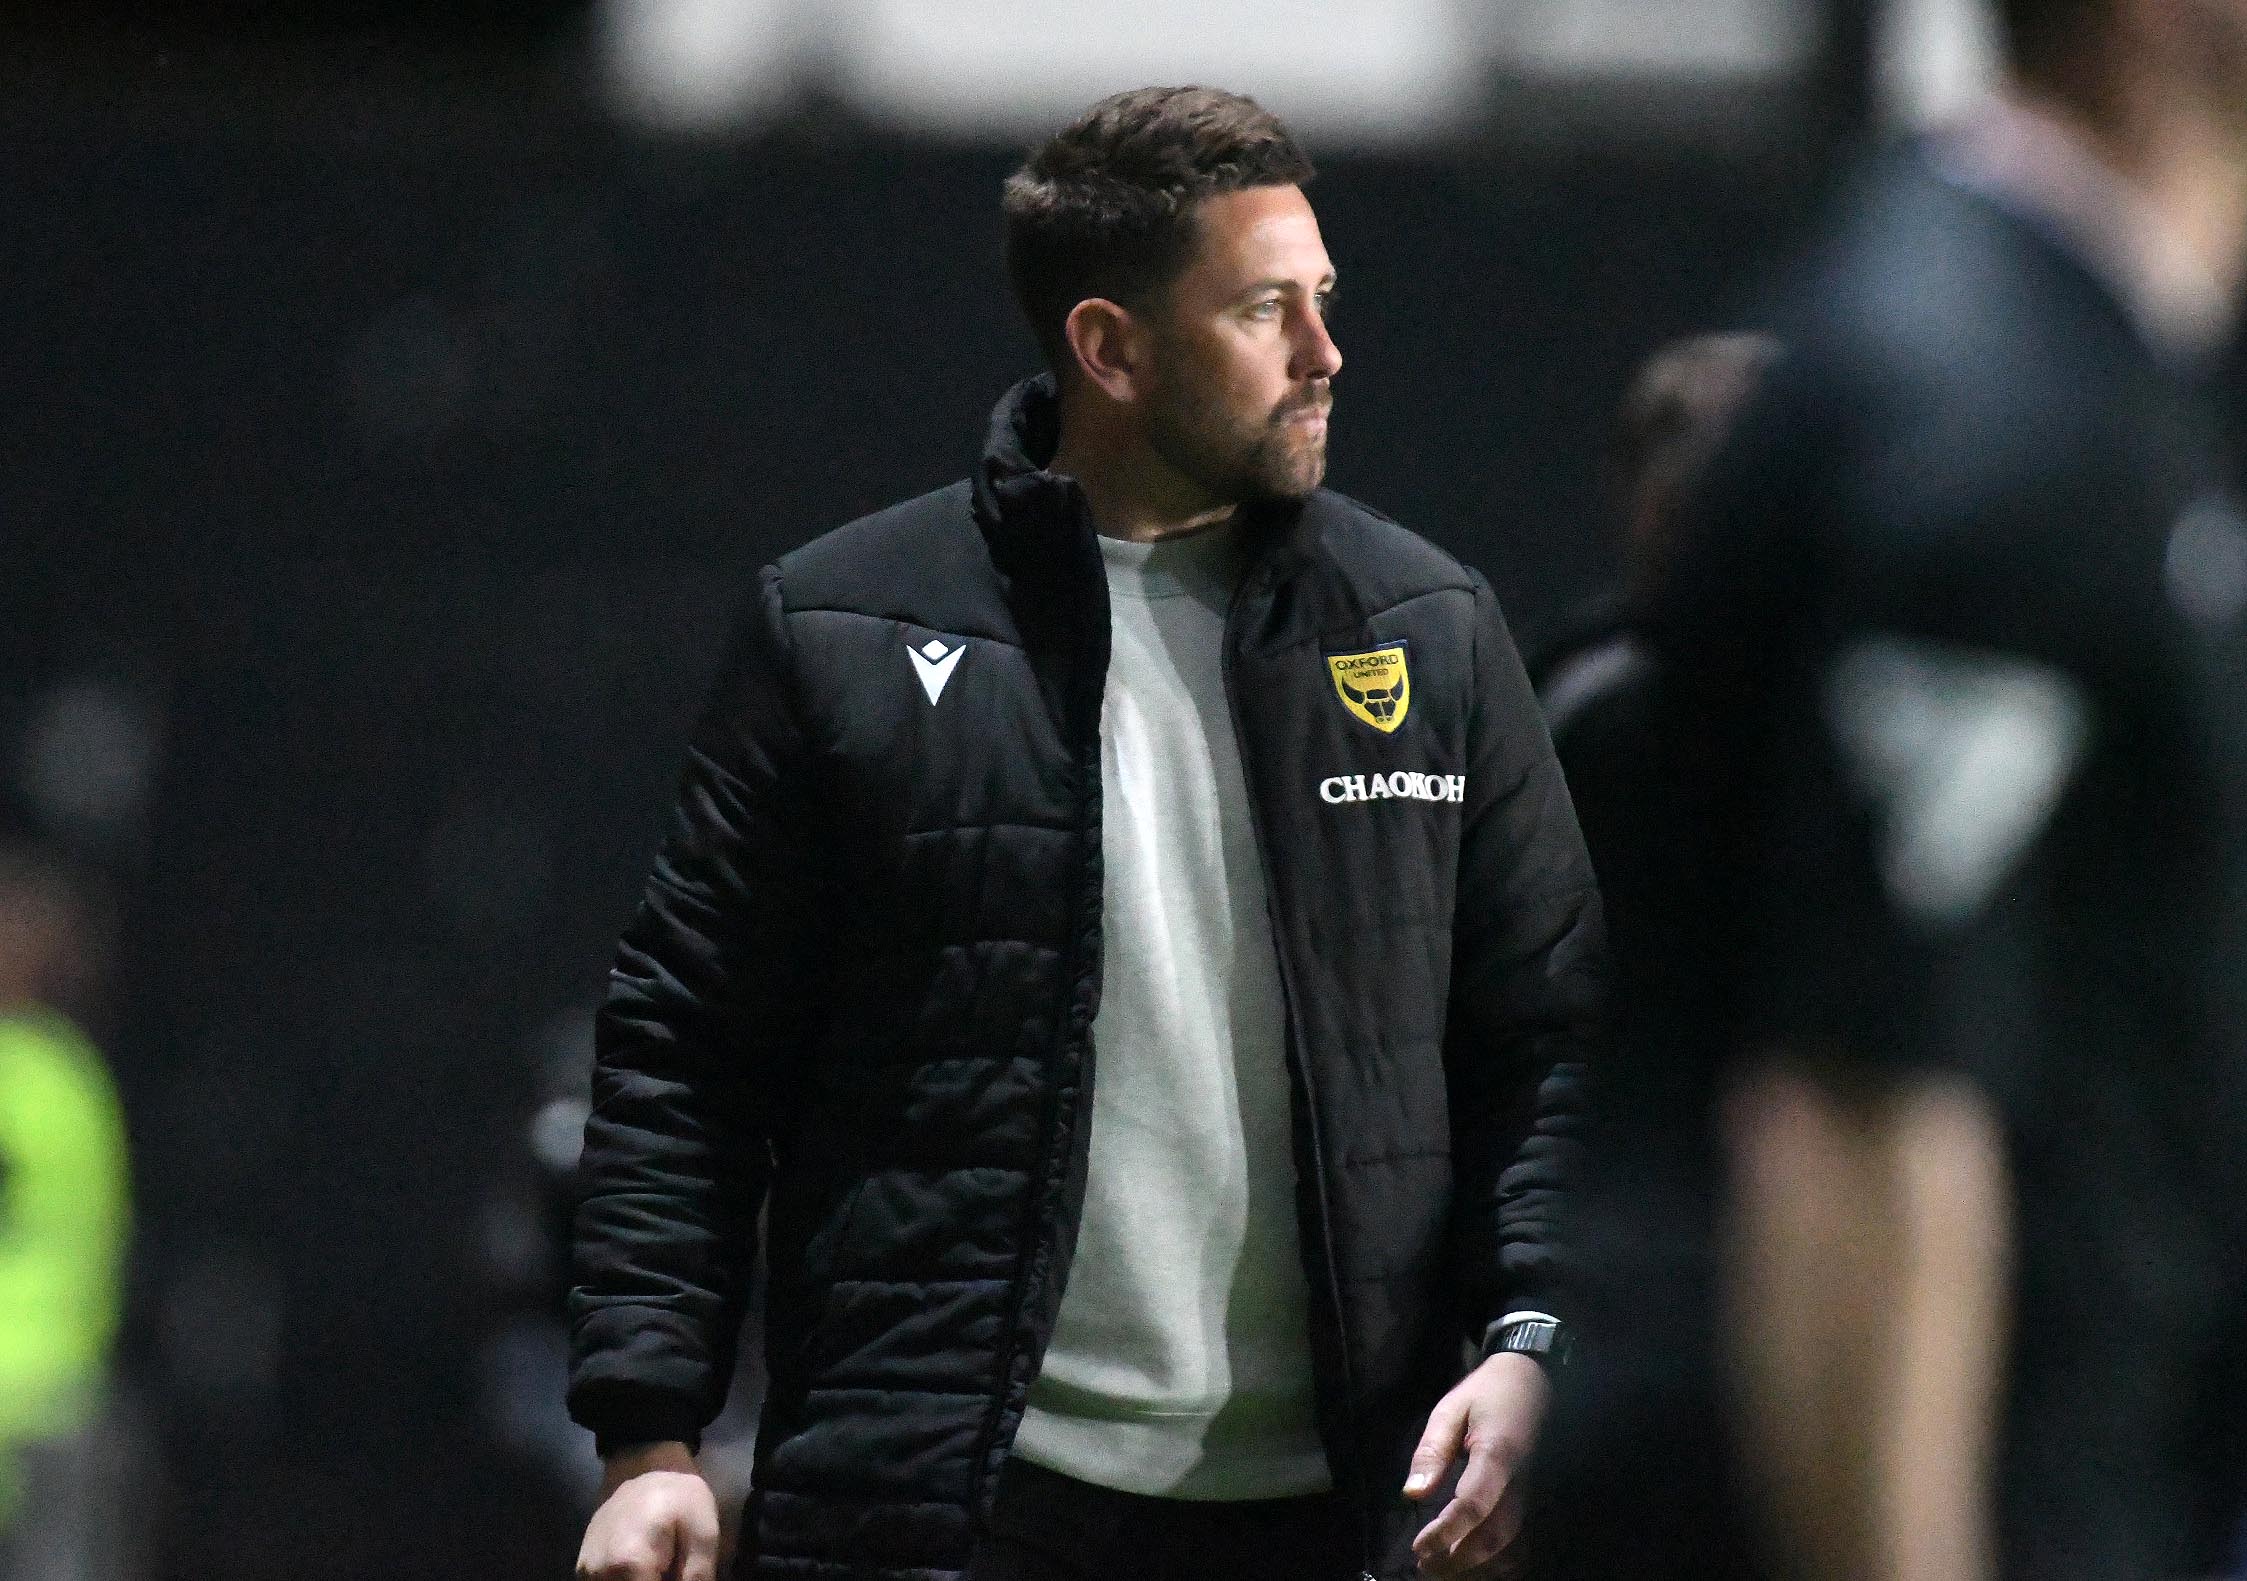 Oxford United boss on reaction to heavy Bolton Wanderers defeat